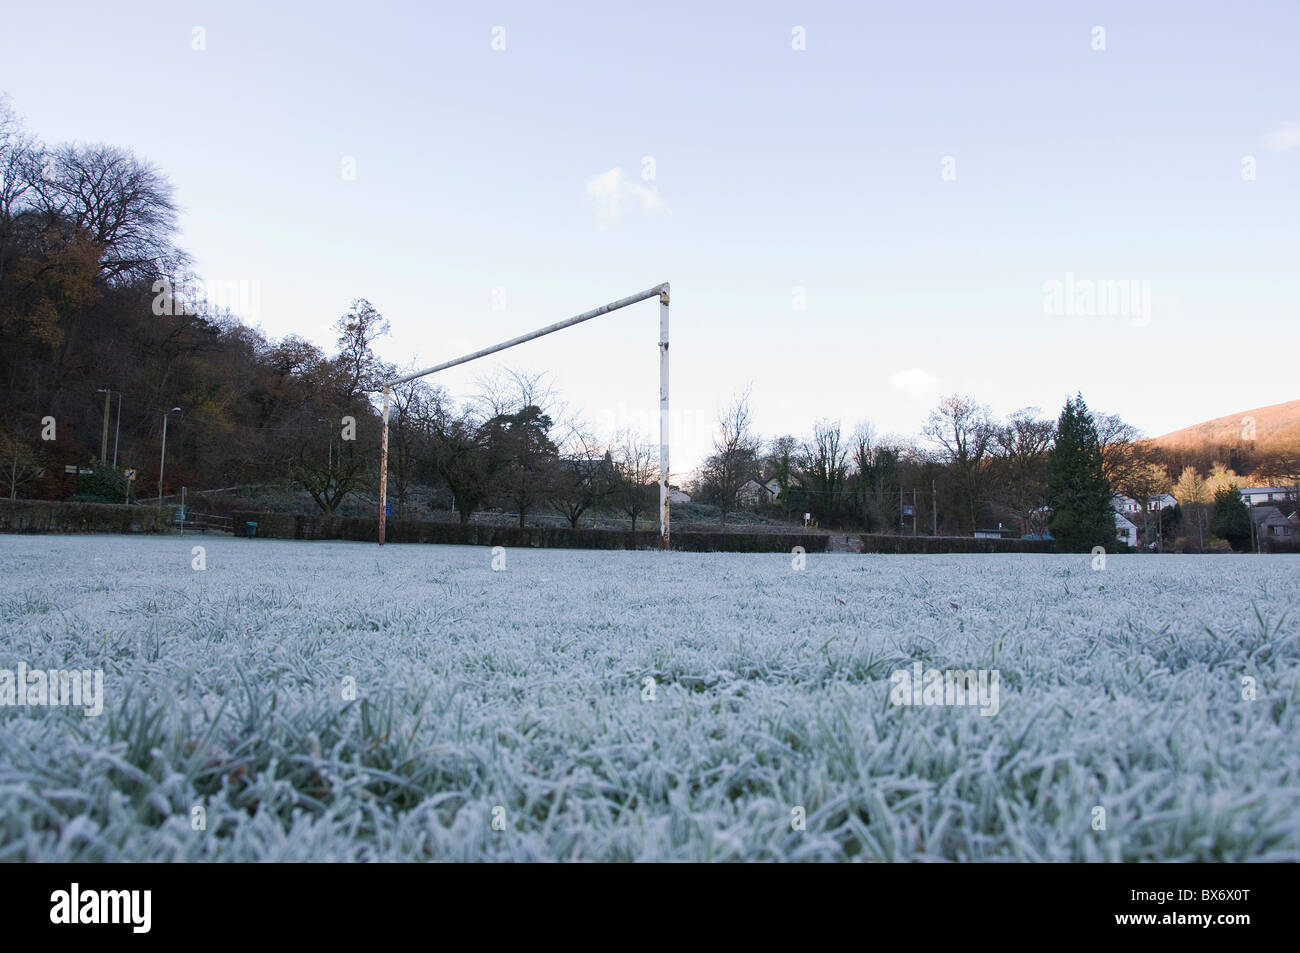 Low landscape view of frozen football pitch and goal posts Stock Photo